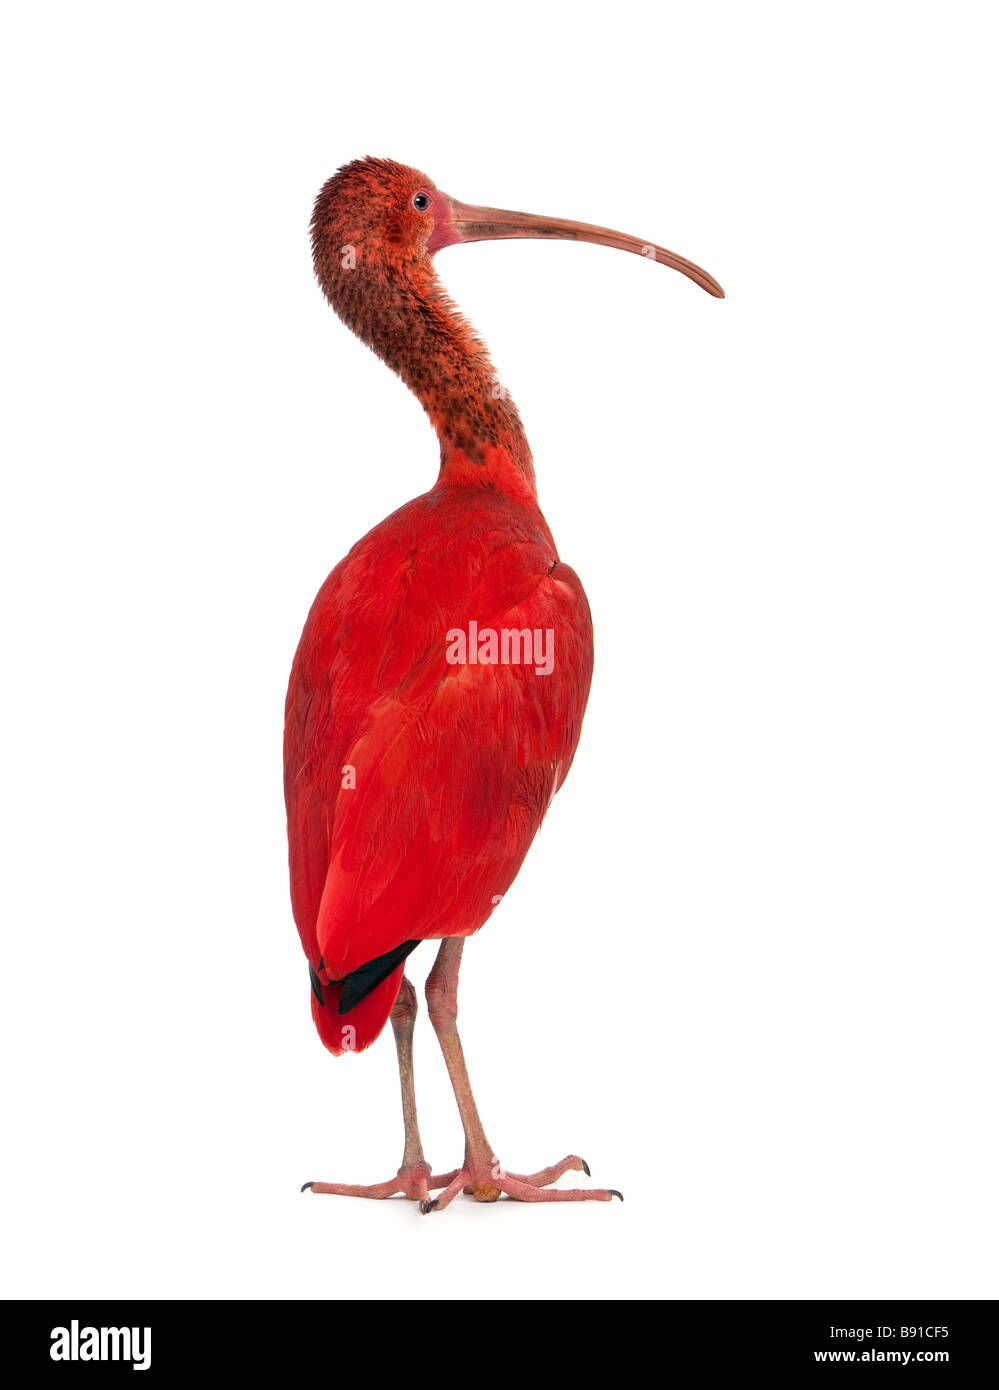 Scarlet Ibis Eudocimus ruber in front of a white background Stock Photo